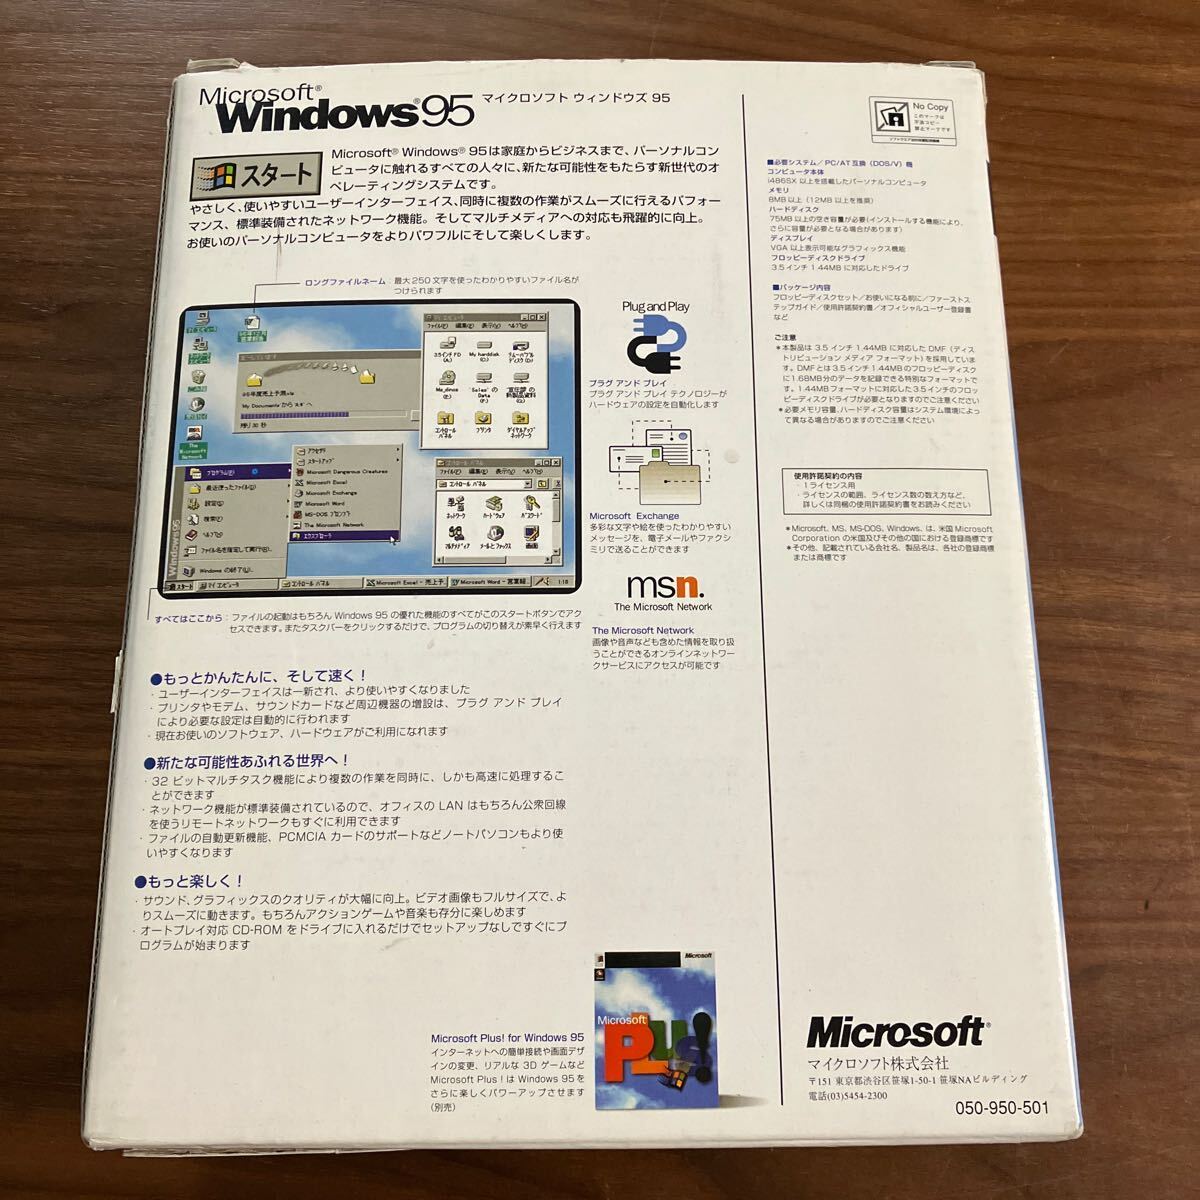 Microsoft Windows 95 operating-system PC/AT interchangeable (DOS/V)3.5 1.44MB